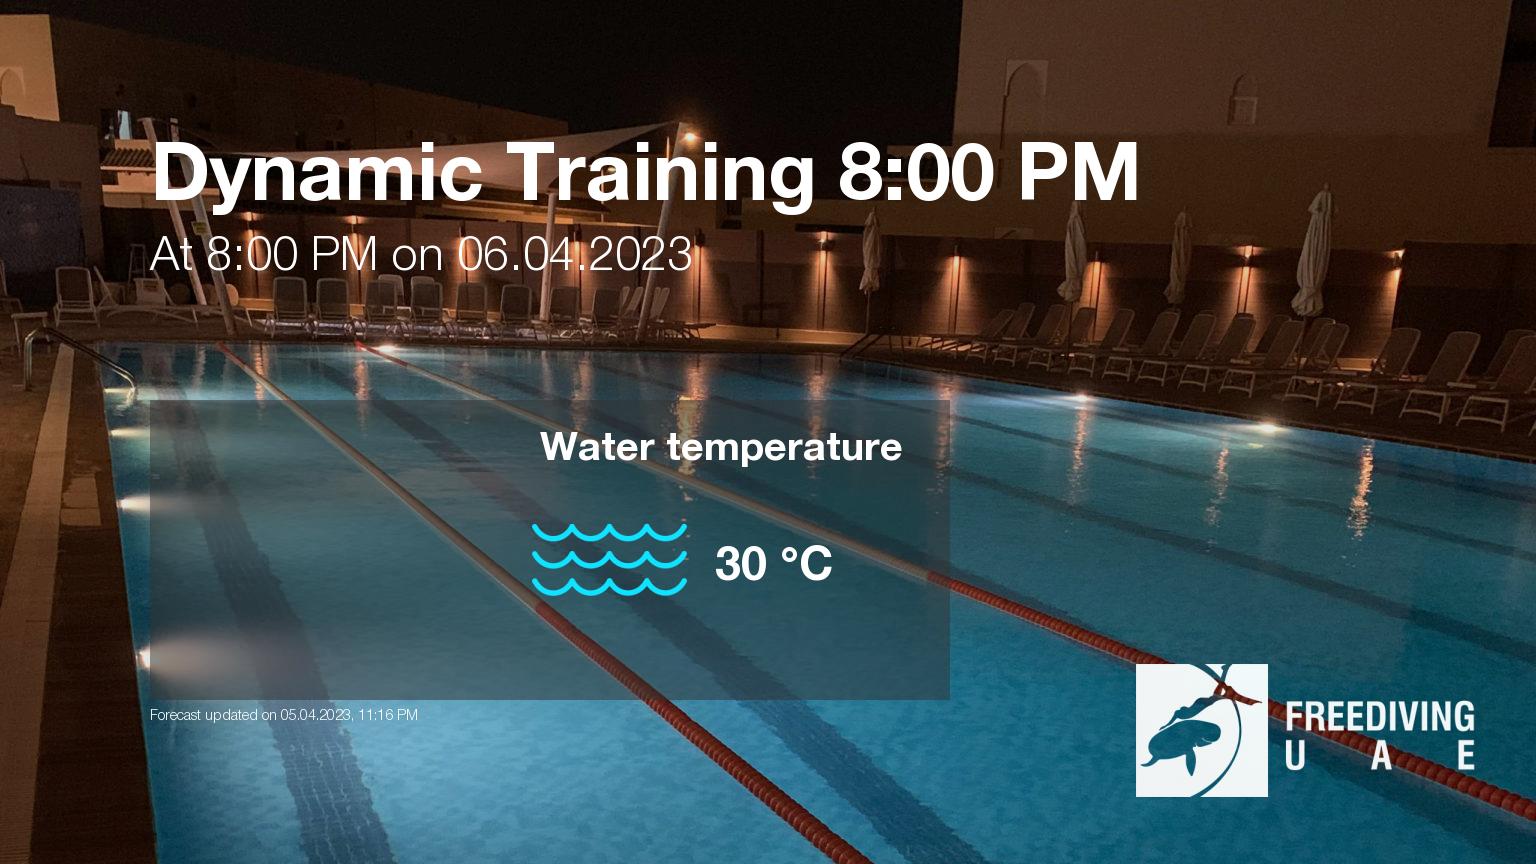 Expected weather during Dynamic Training 8:00 PM on Thu, Apr 6, at 8:00 PM